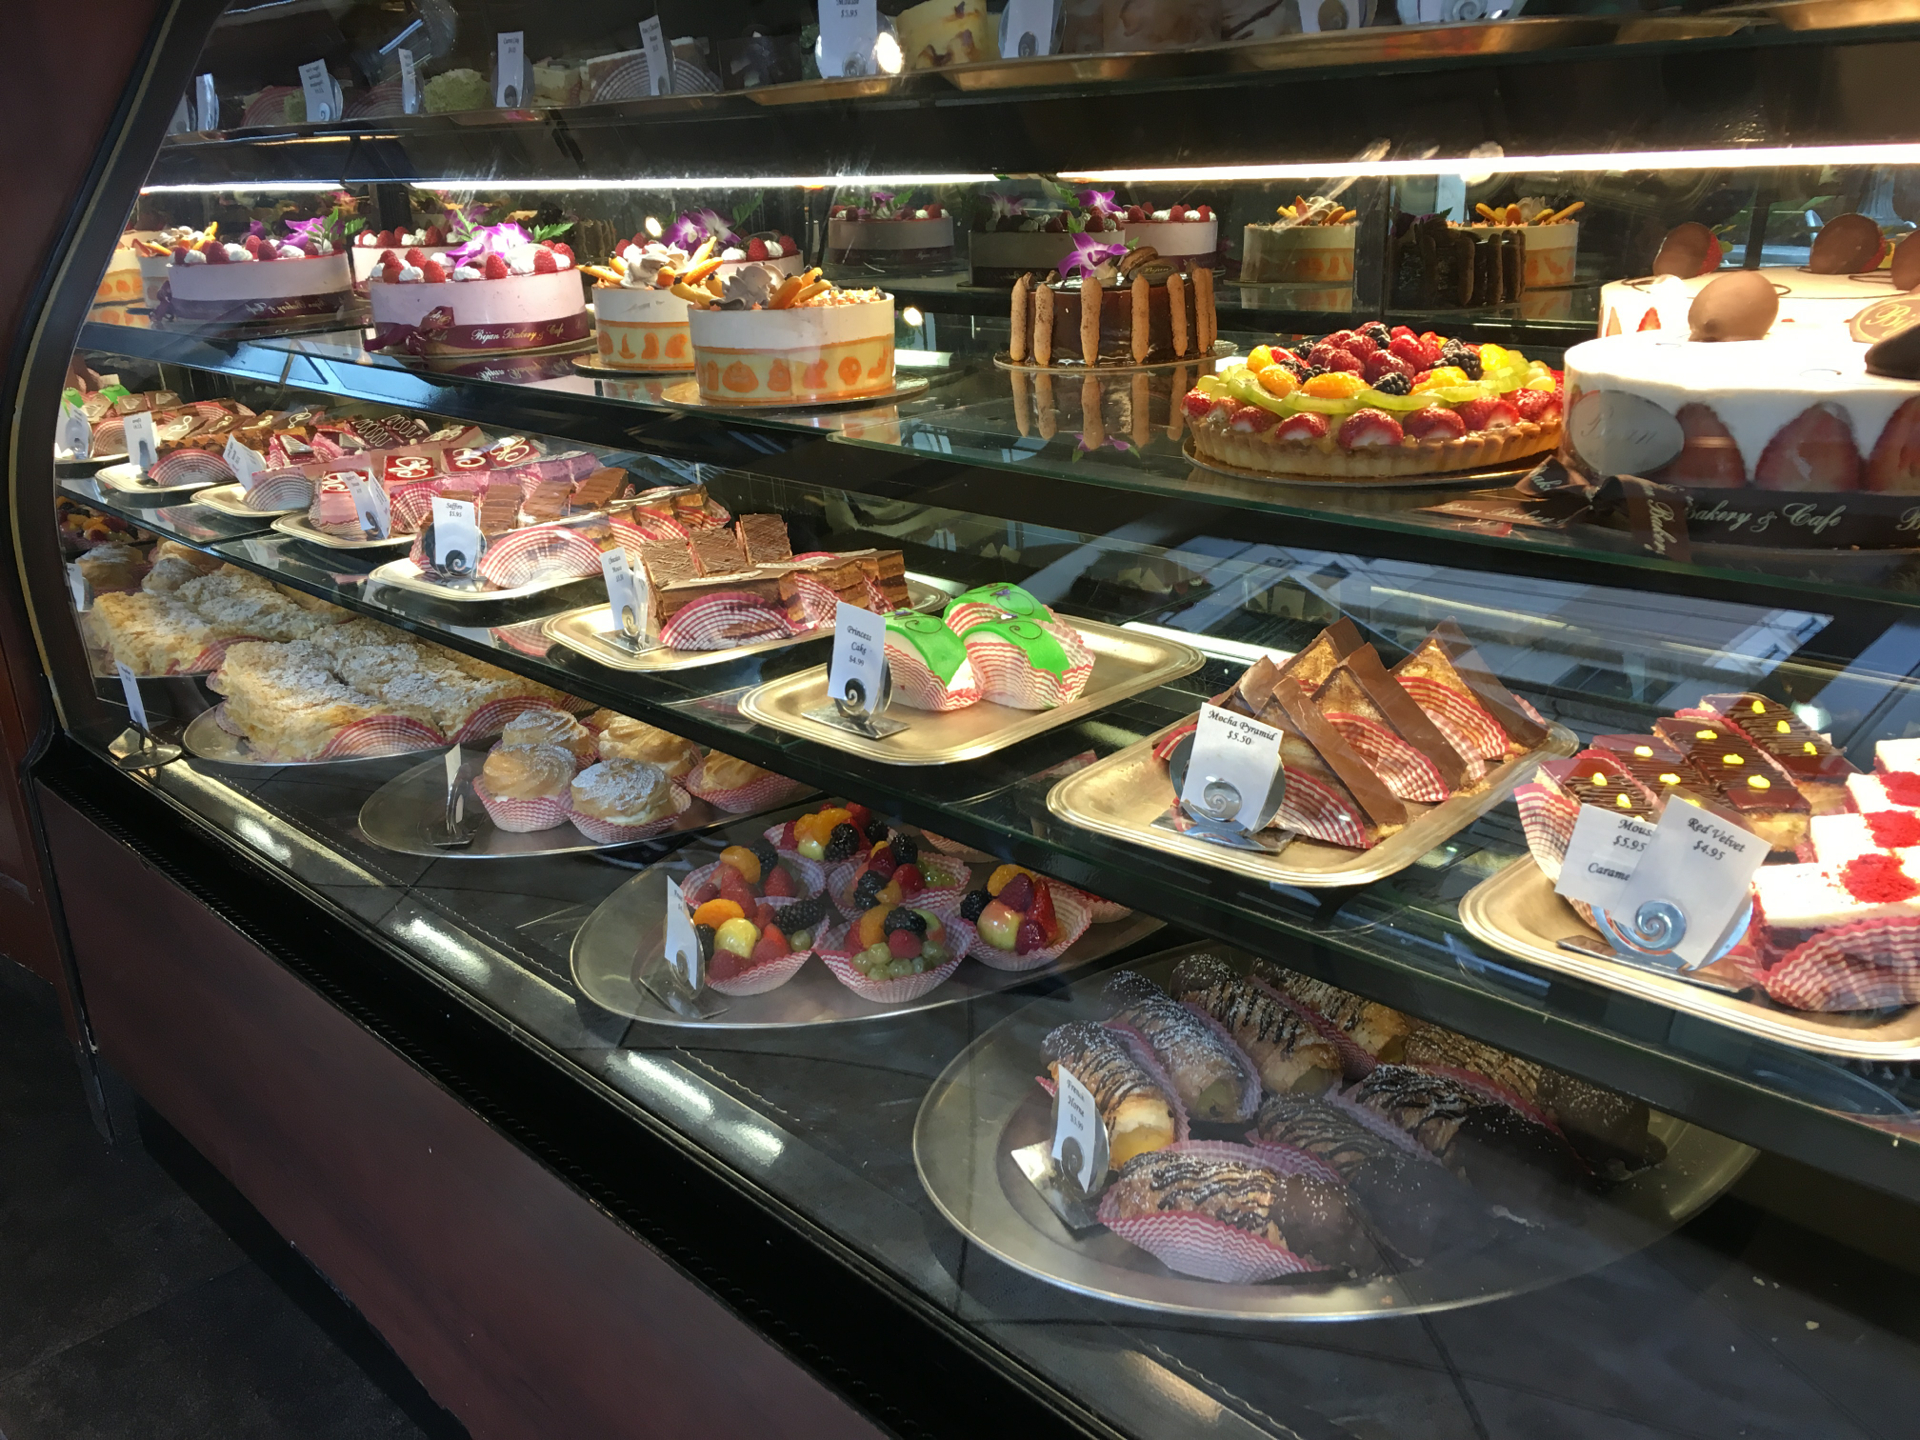 A selection of pastries at Bijan Bakery & Cafe.